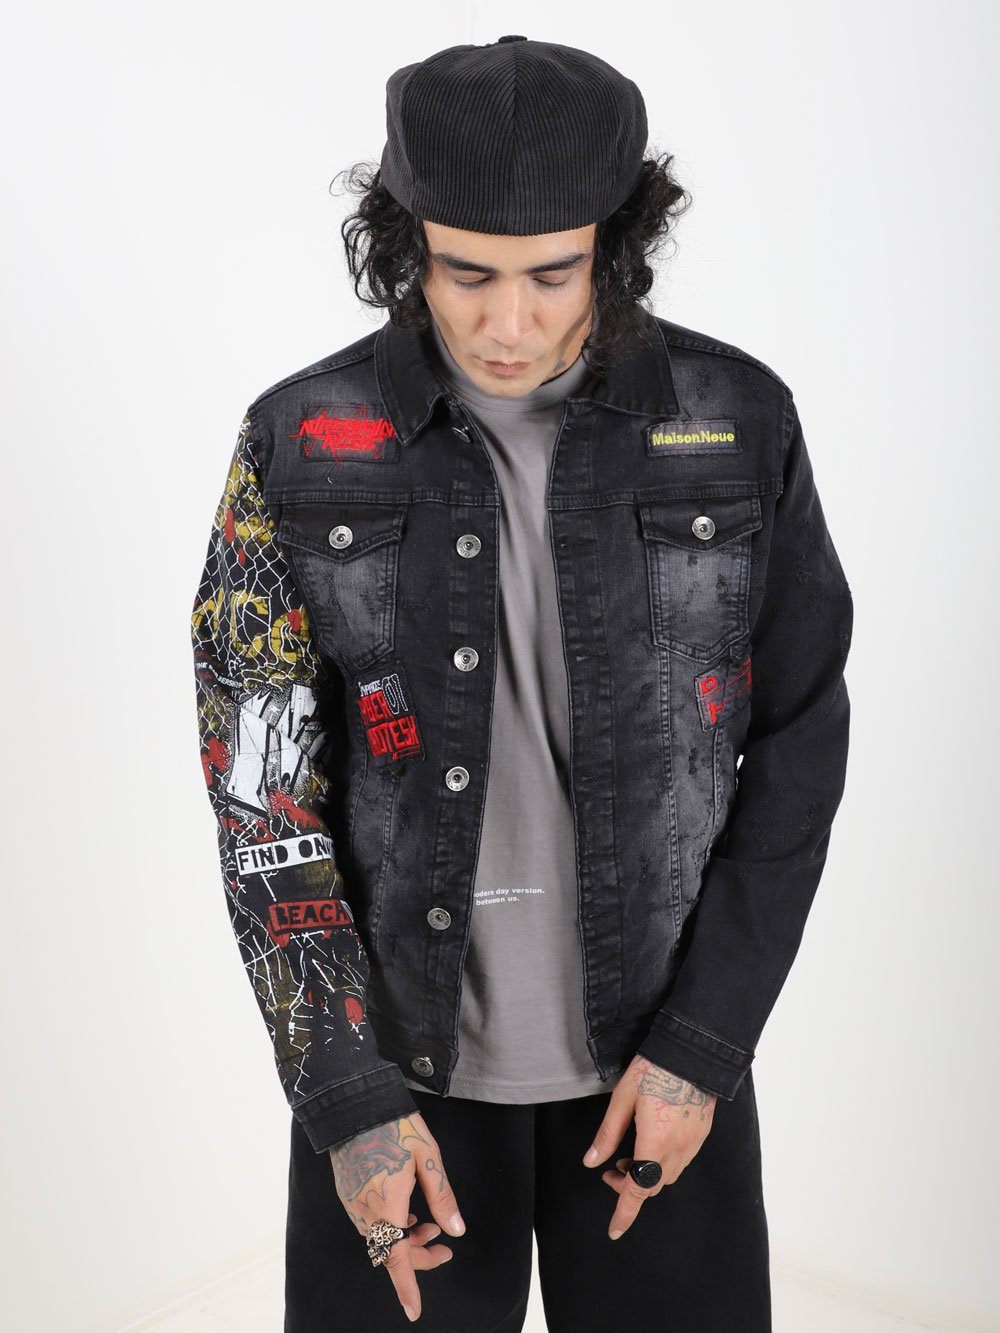 A man wearing a JETMAN denim jacket with patches on it.